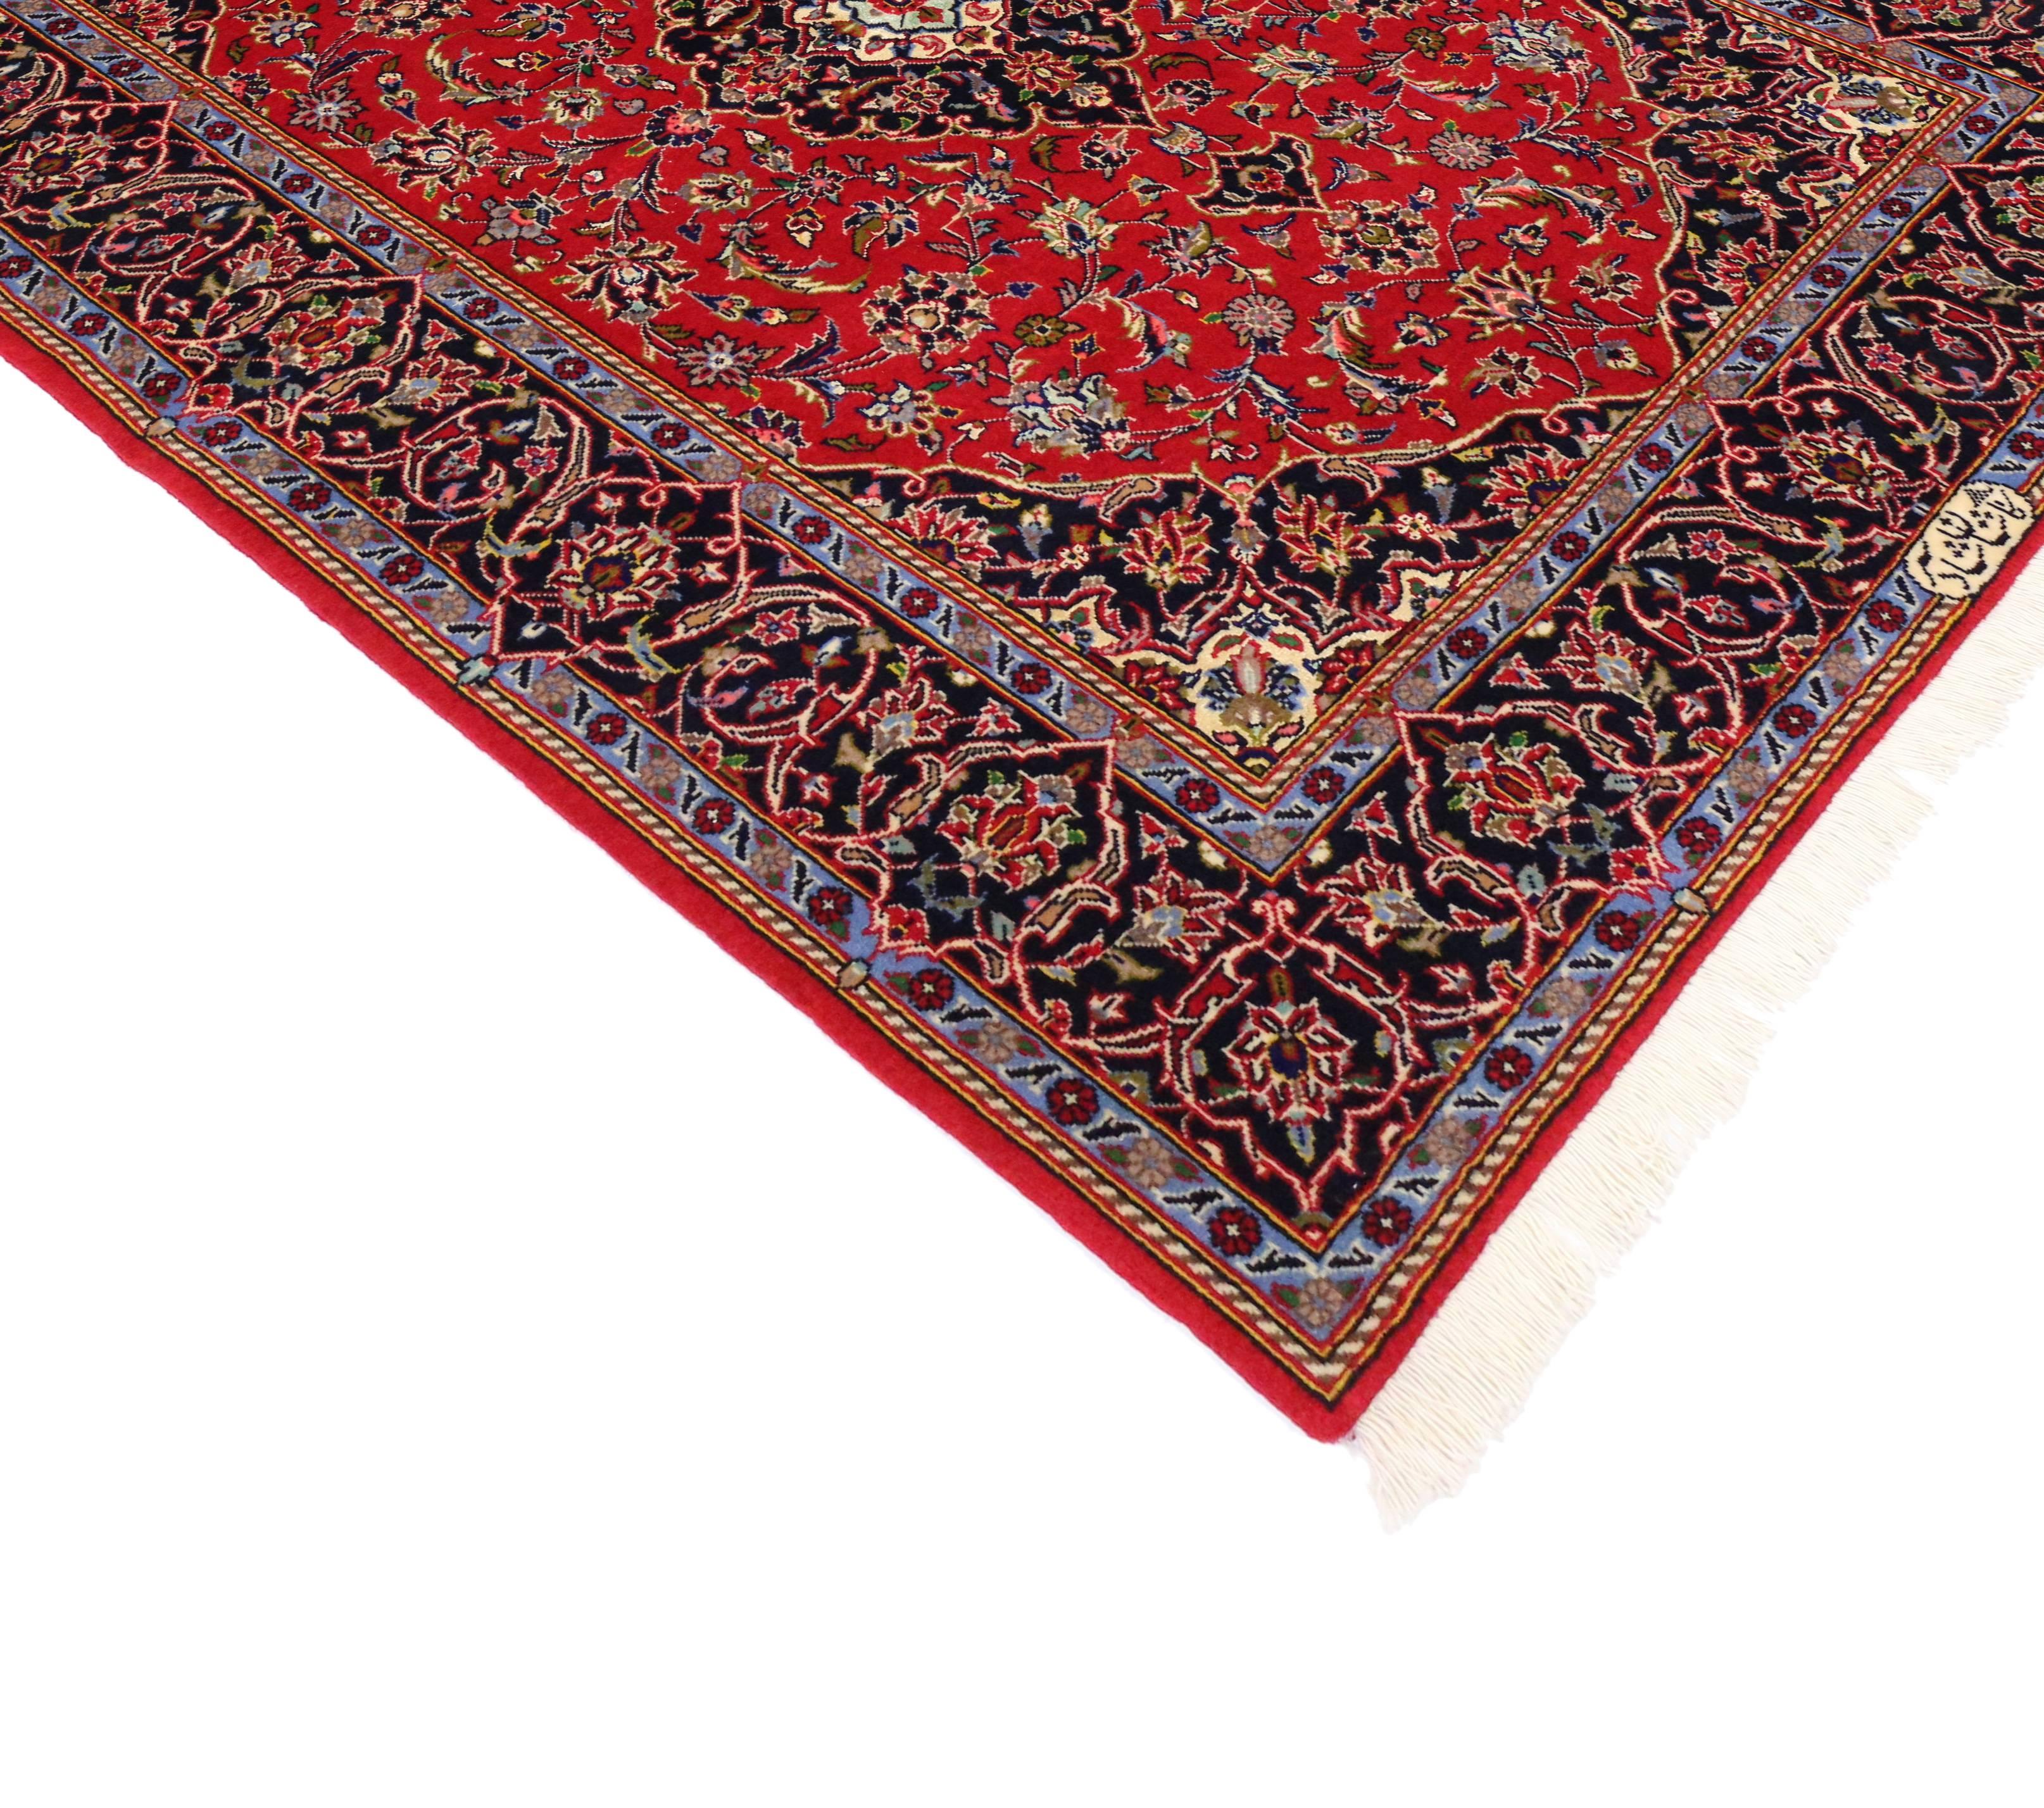 74338 vintage Persian Kashan Rug with modern traditional style 04'00 X 05'06. This hand-knotted wool vintage Persian Kashan rug features a modern traditional style. A cartouche style grand medallion takes centre stage in a red field surrounded by an